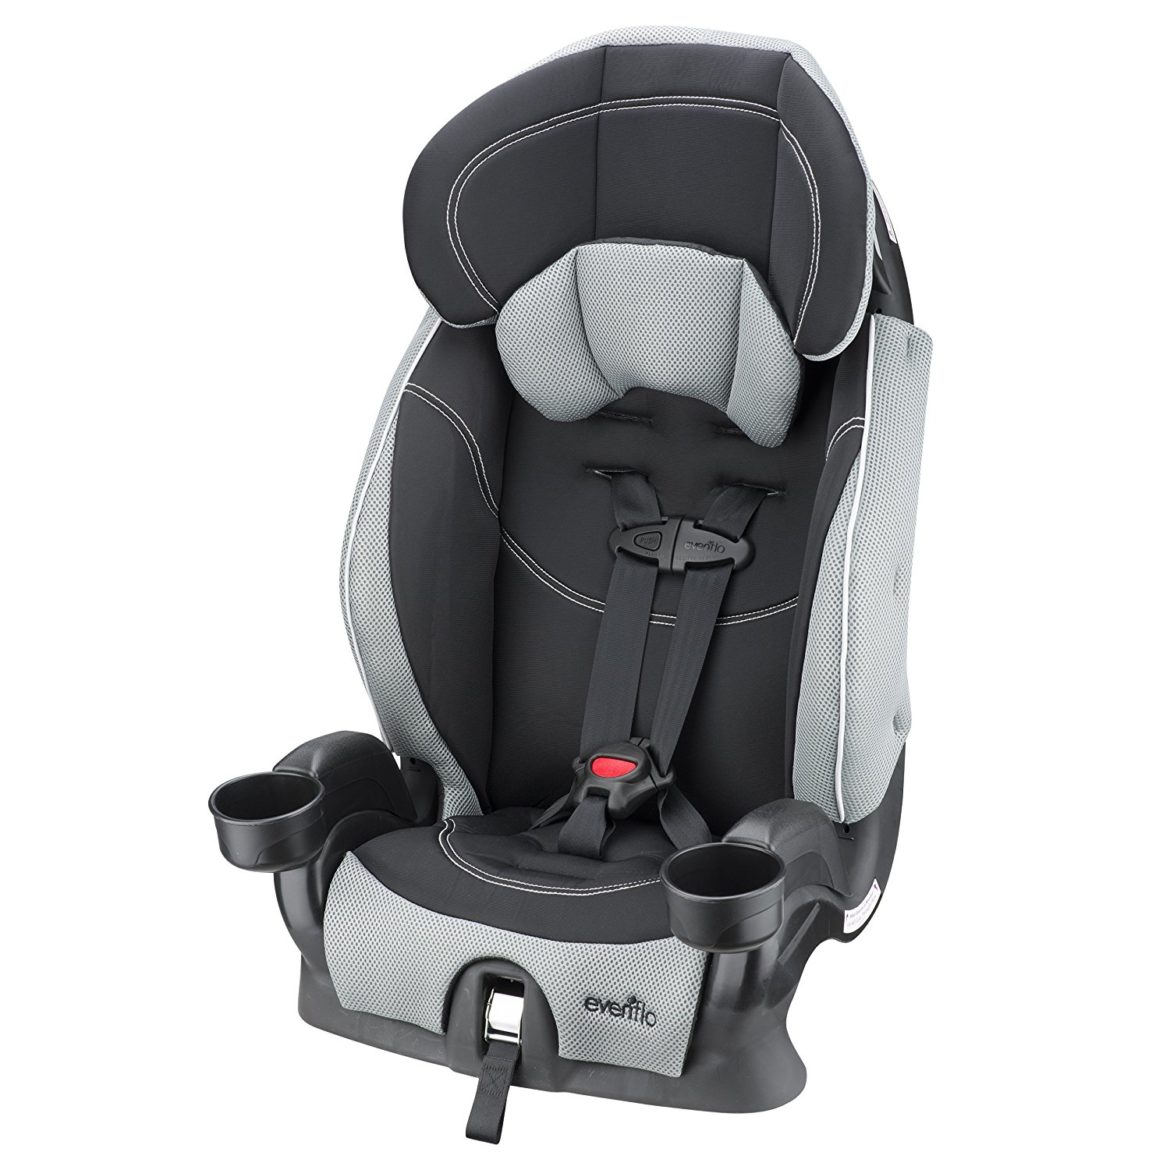 [REVIEWED] The Top 8 Best High Back Booster Seats [2022]